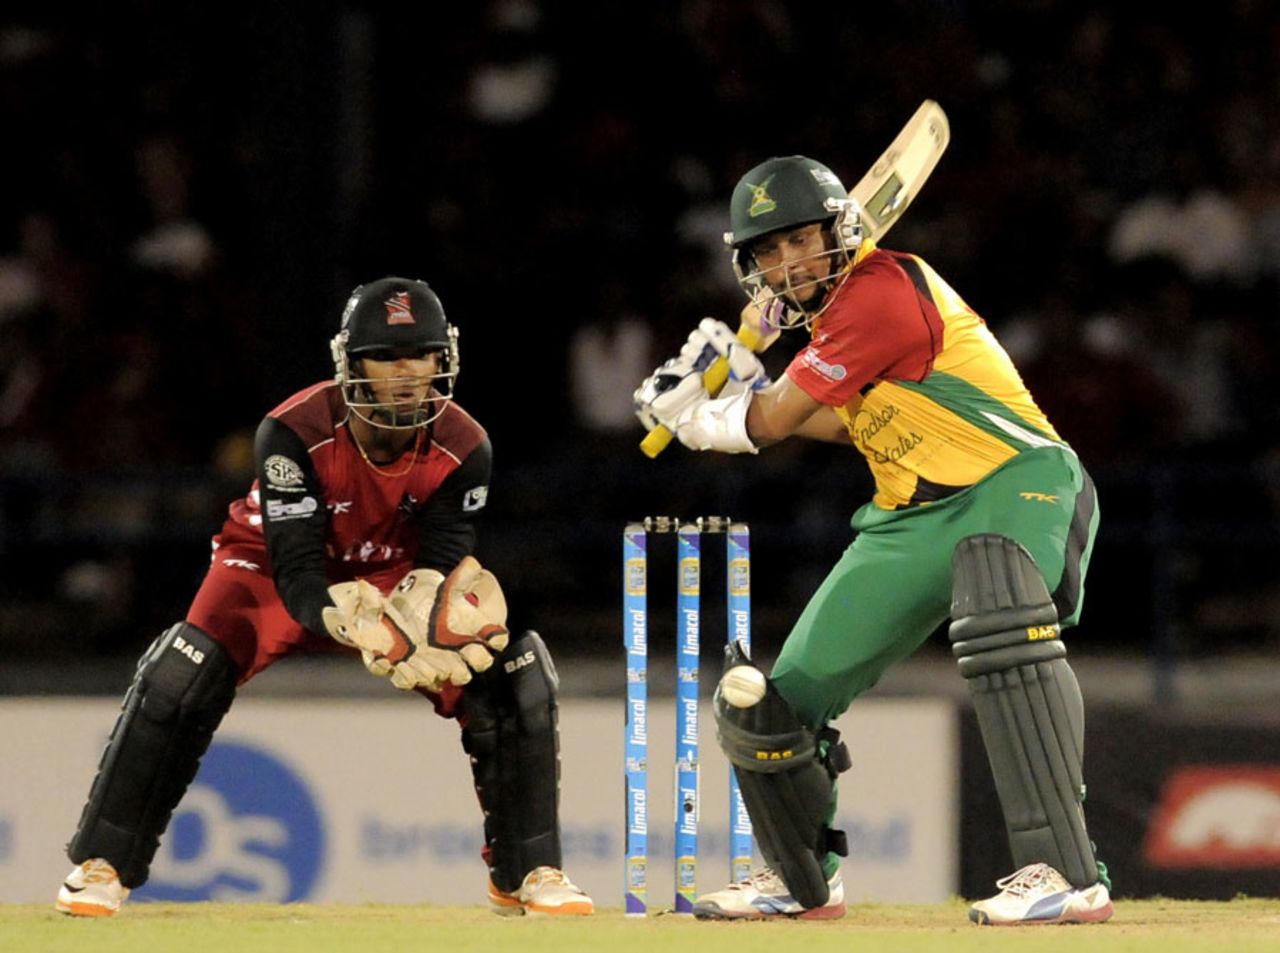 Tillakaratne Dilshan finished with figures of 2 for 14 off four overs and scored 39, Trinidad & Tobago Red Steel v Guyana Amazon Warriors, Caribbean Premier League 2013, 1st semi-final, Port-of-Spain, August 22, 2013